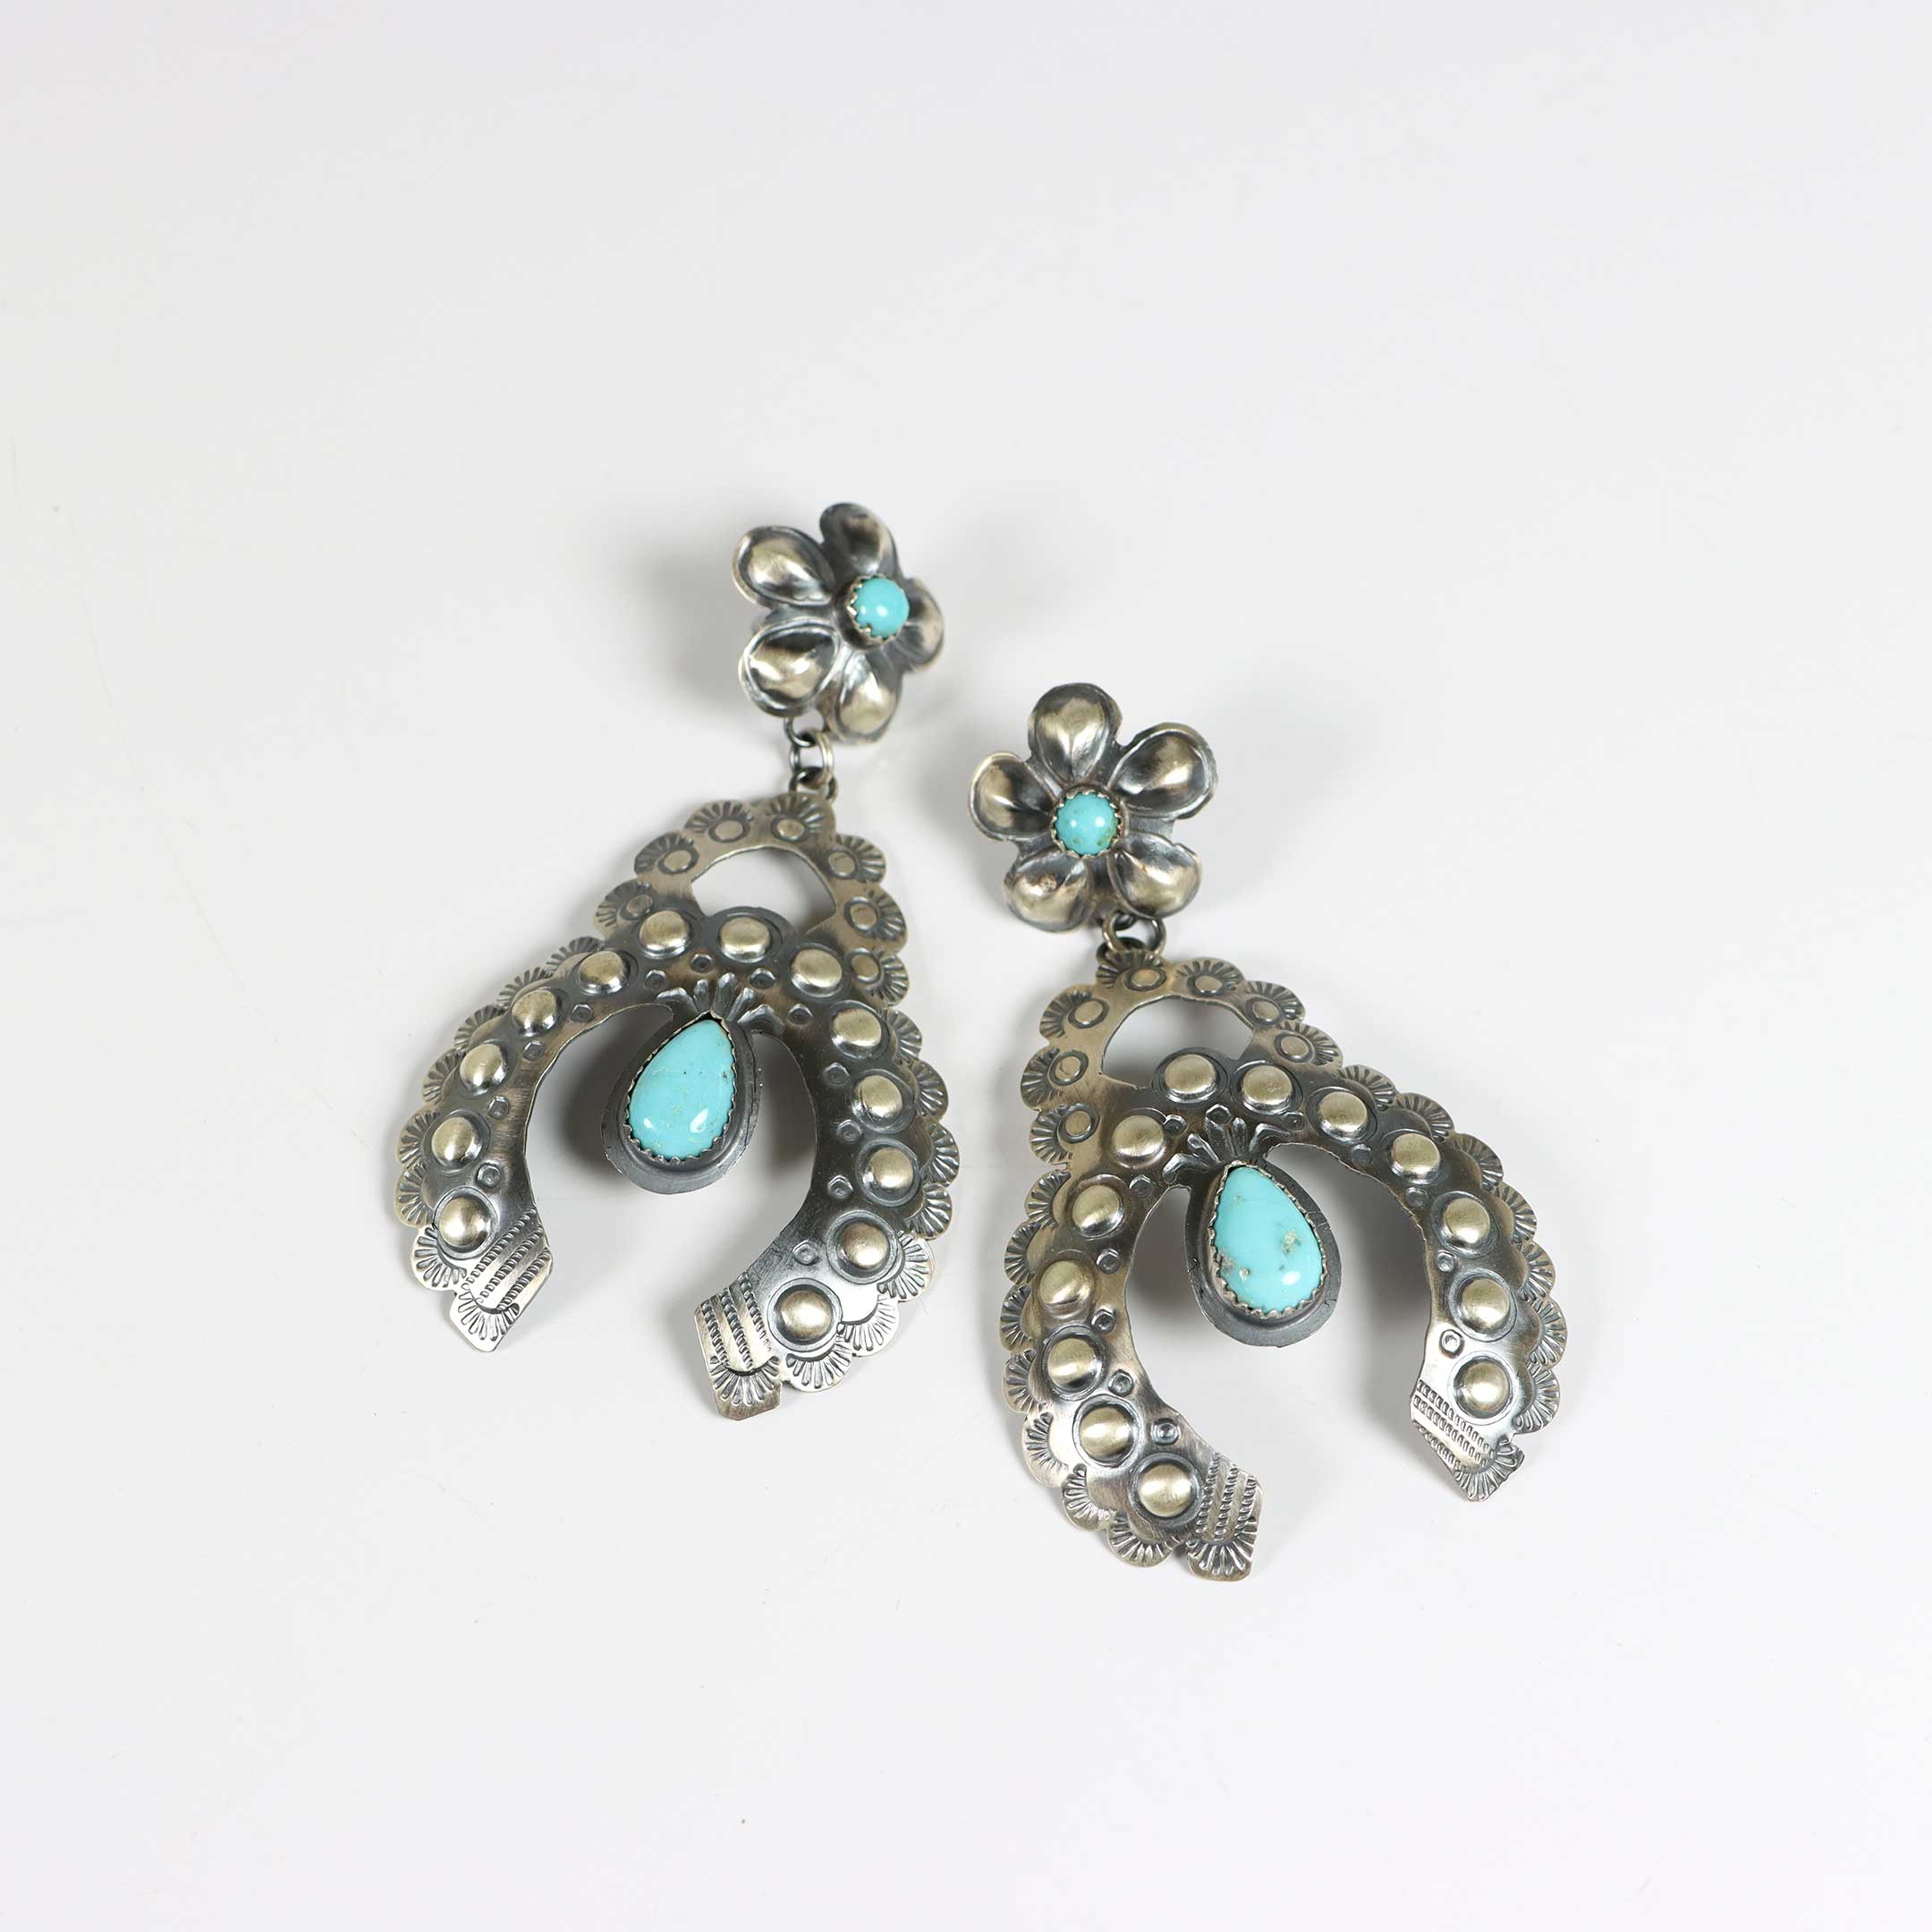 Stamped Sterling Silver Earrings with Turquoise by Gabrielle Yazzie